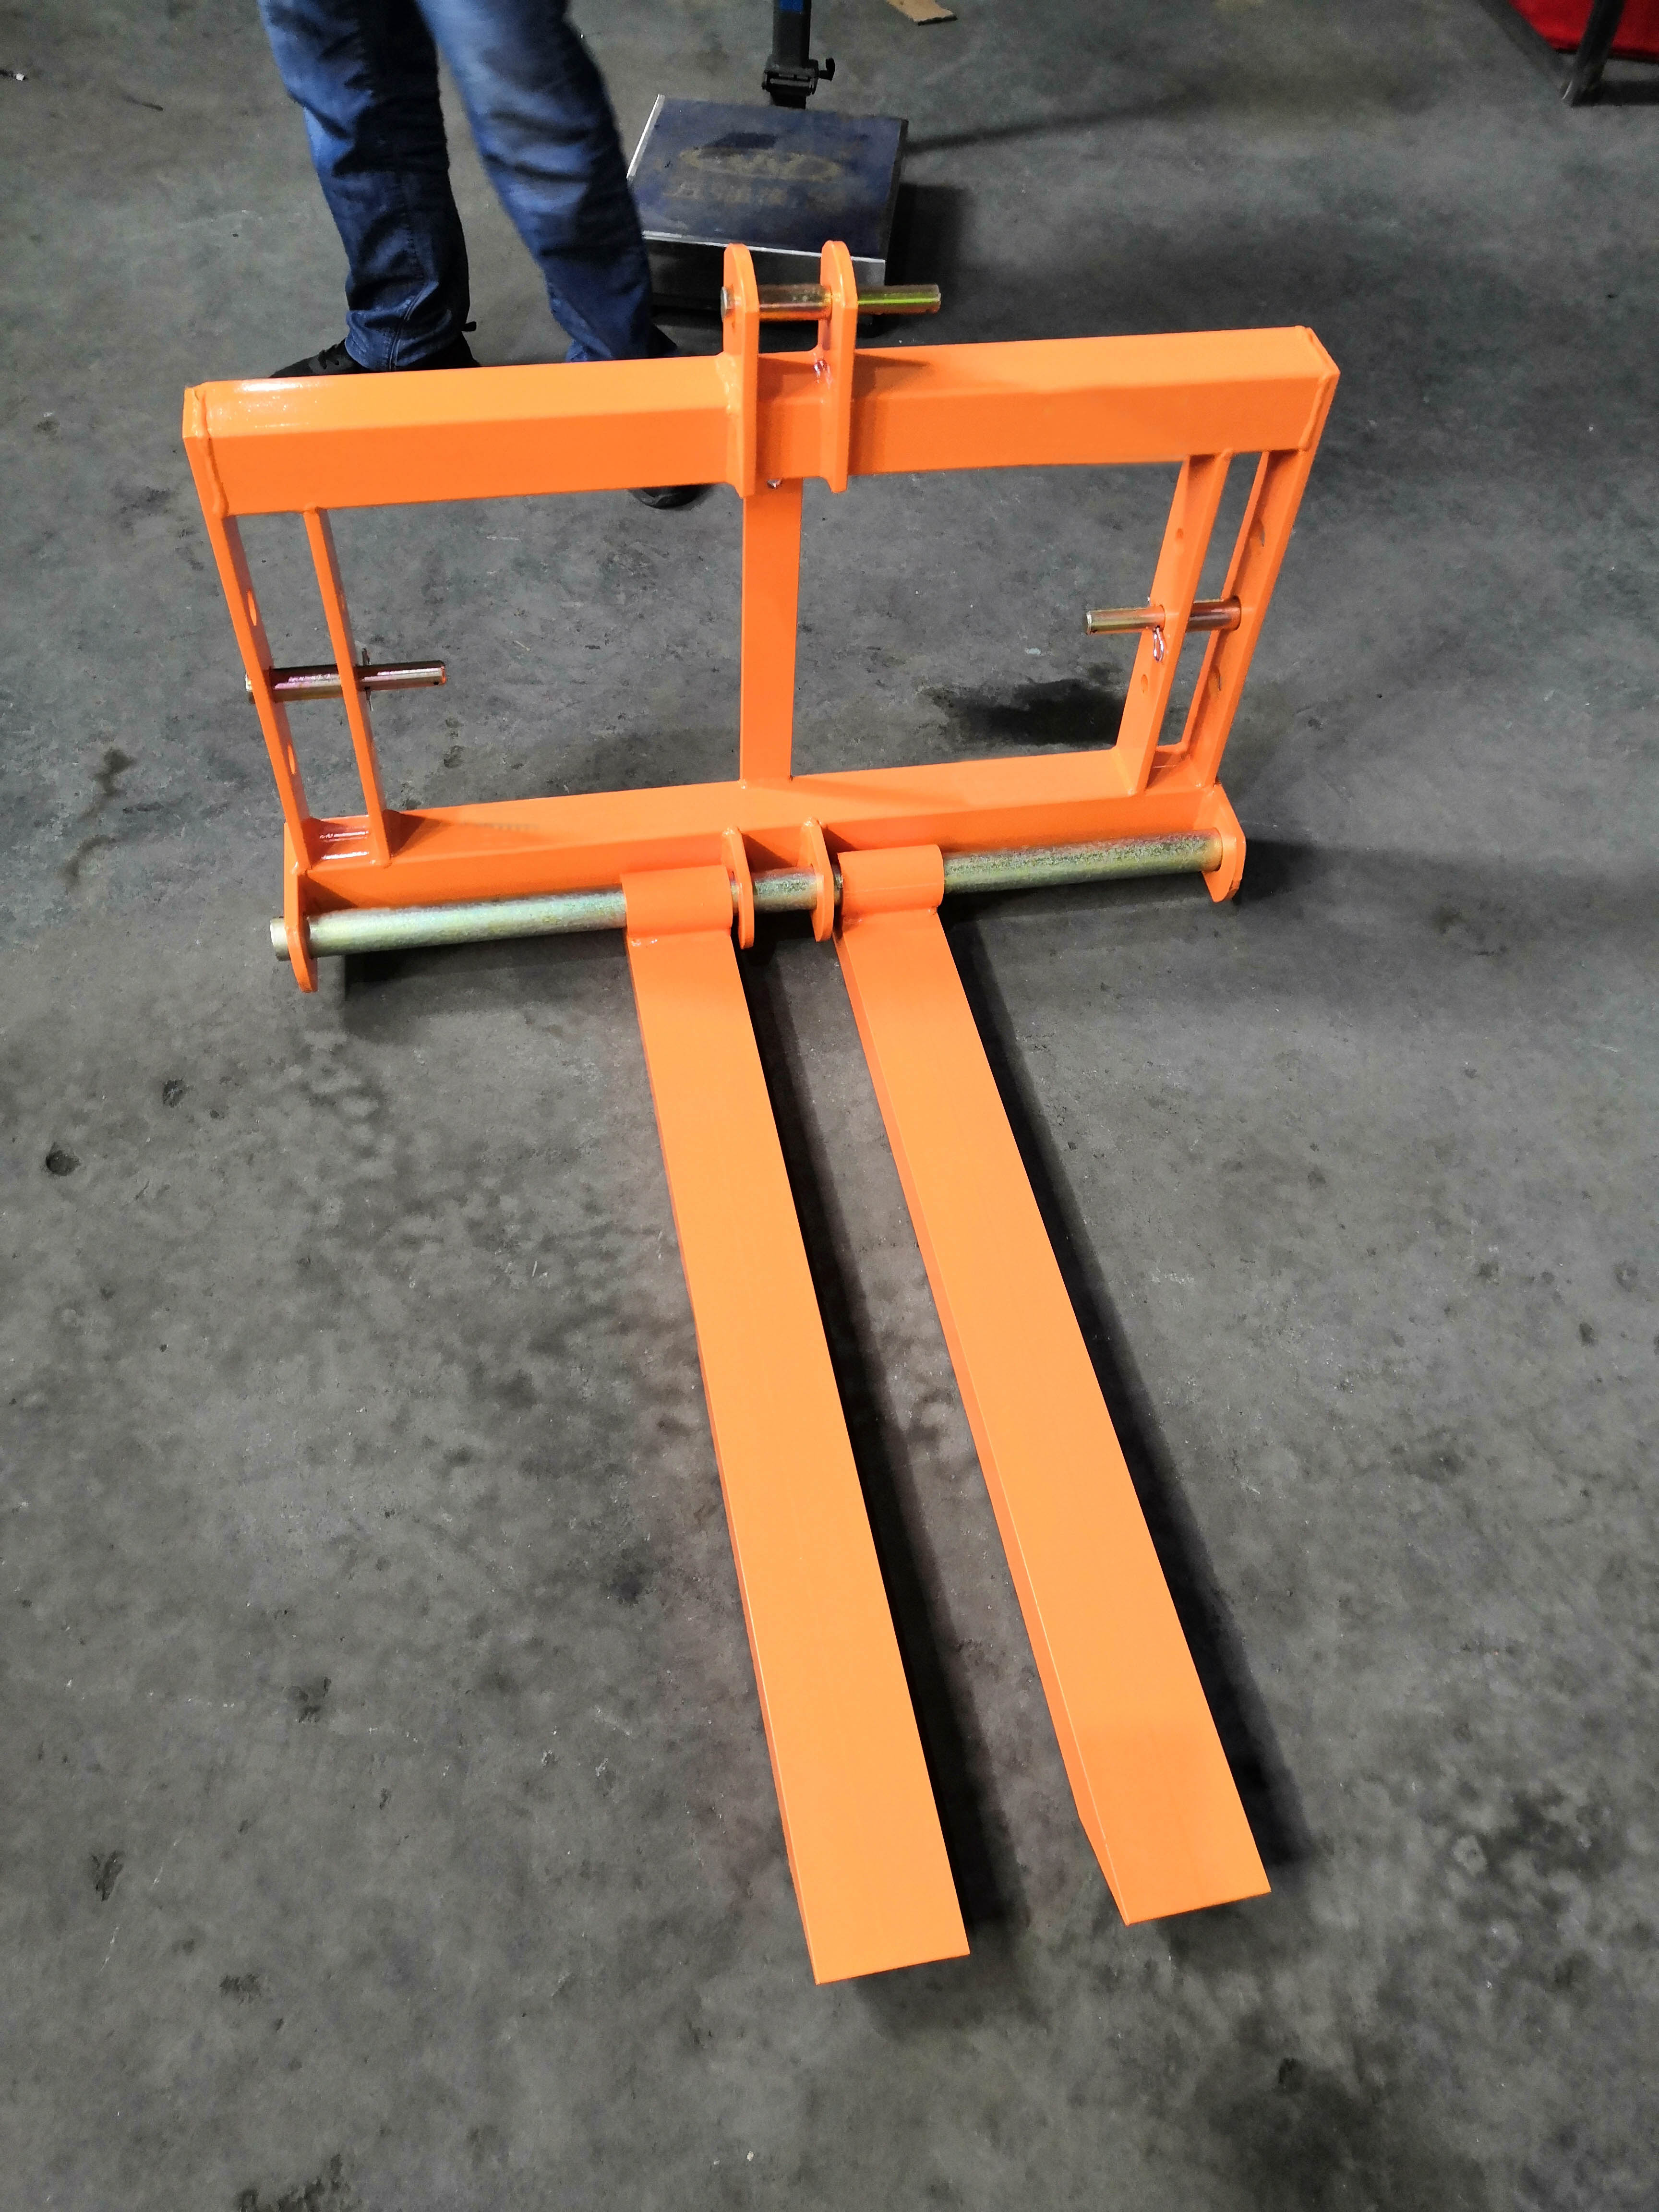 3point hitch New Pallet Forks, foldable pallet mover for compact tractors